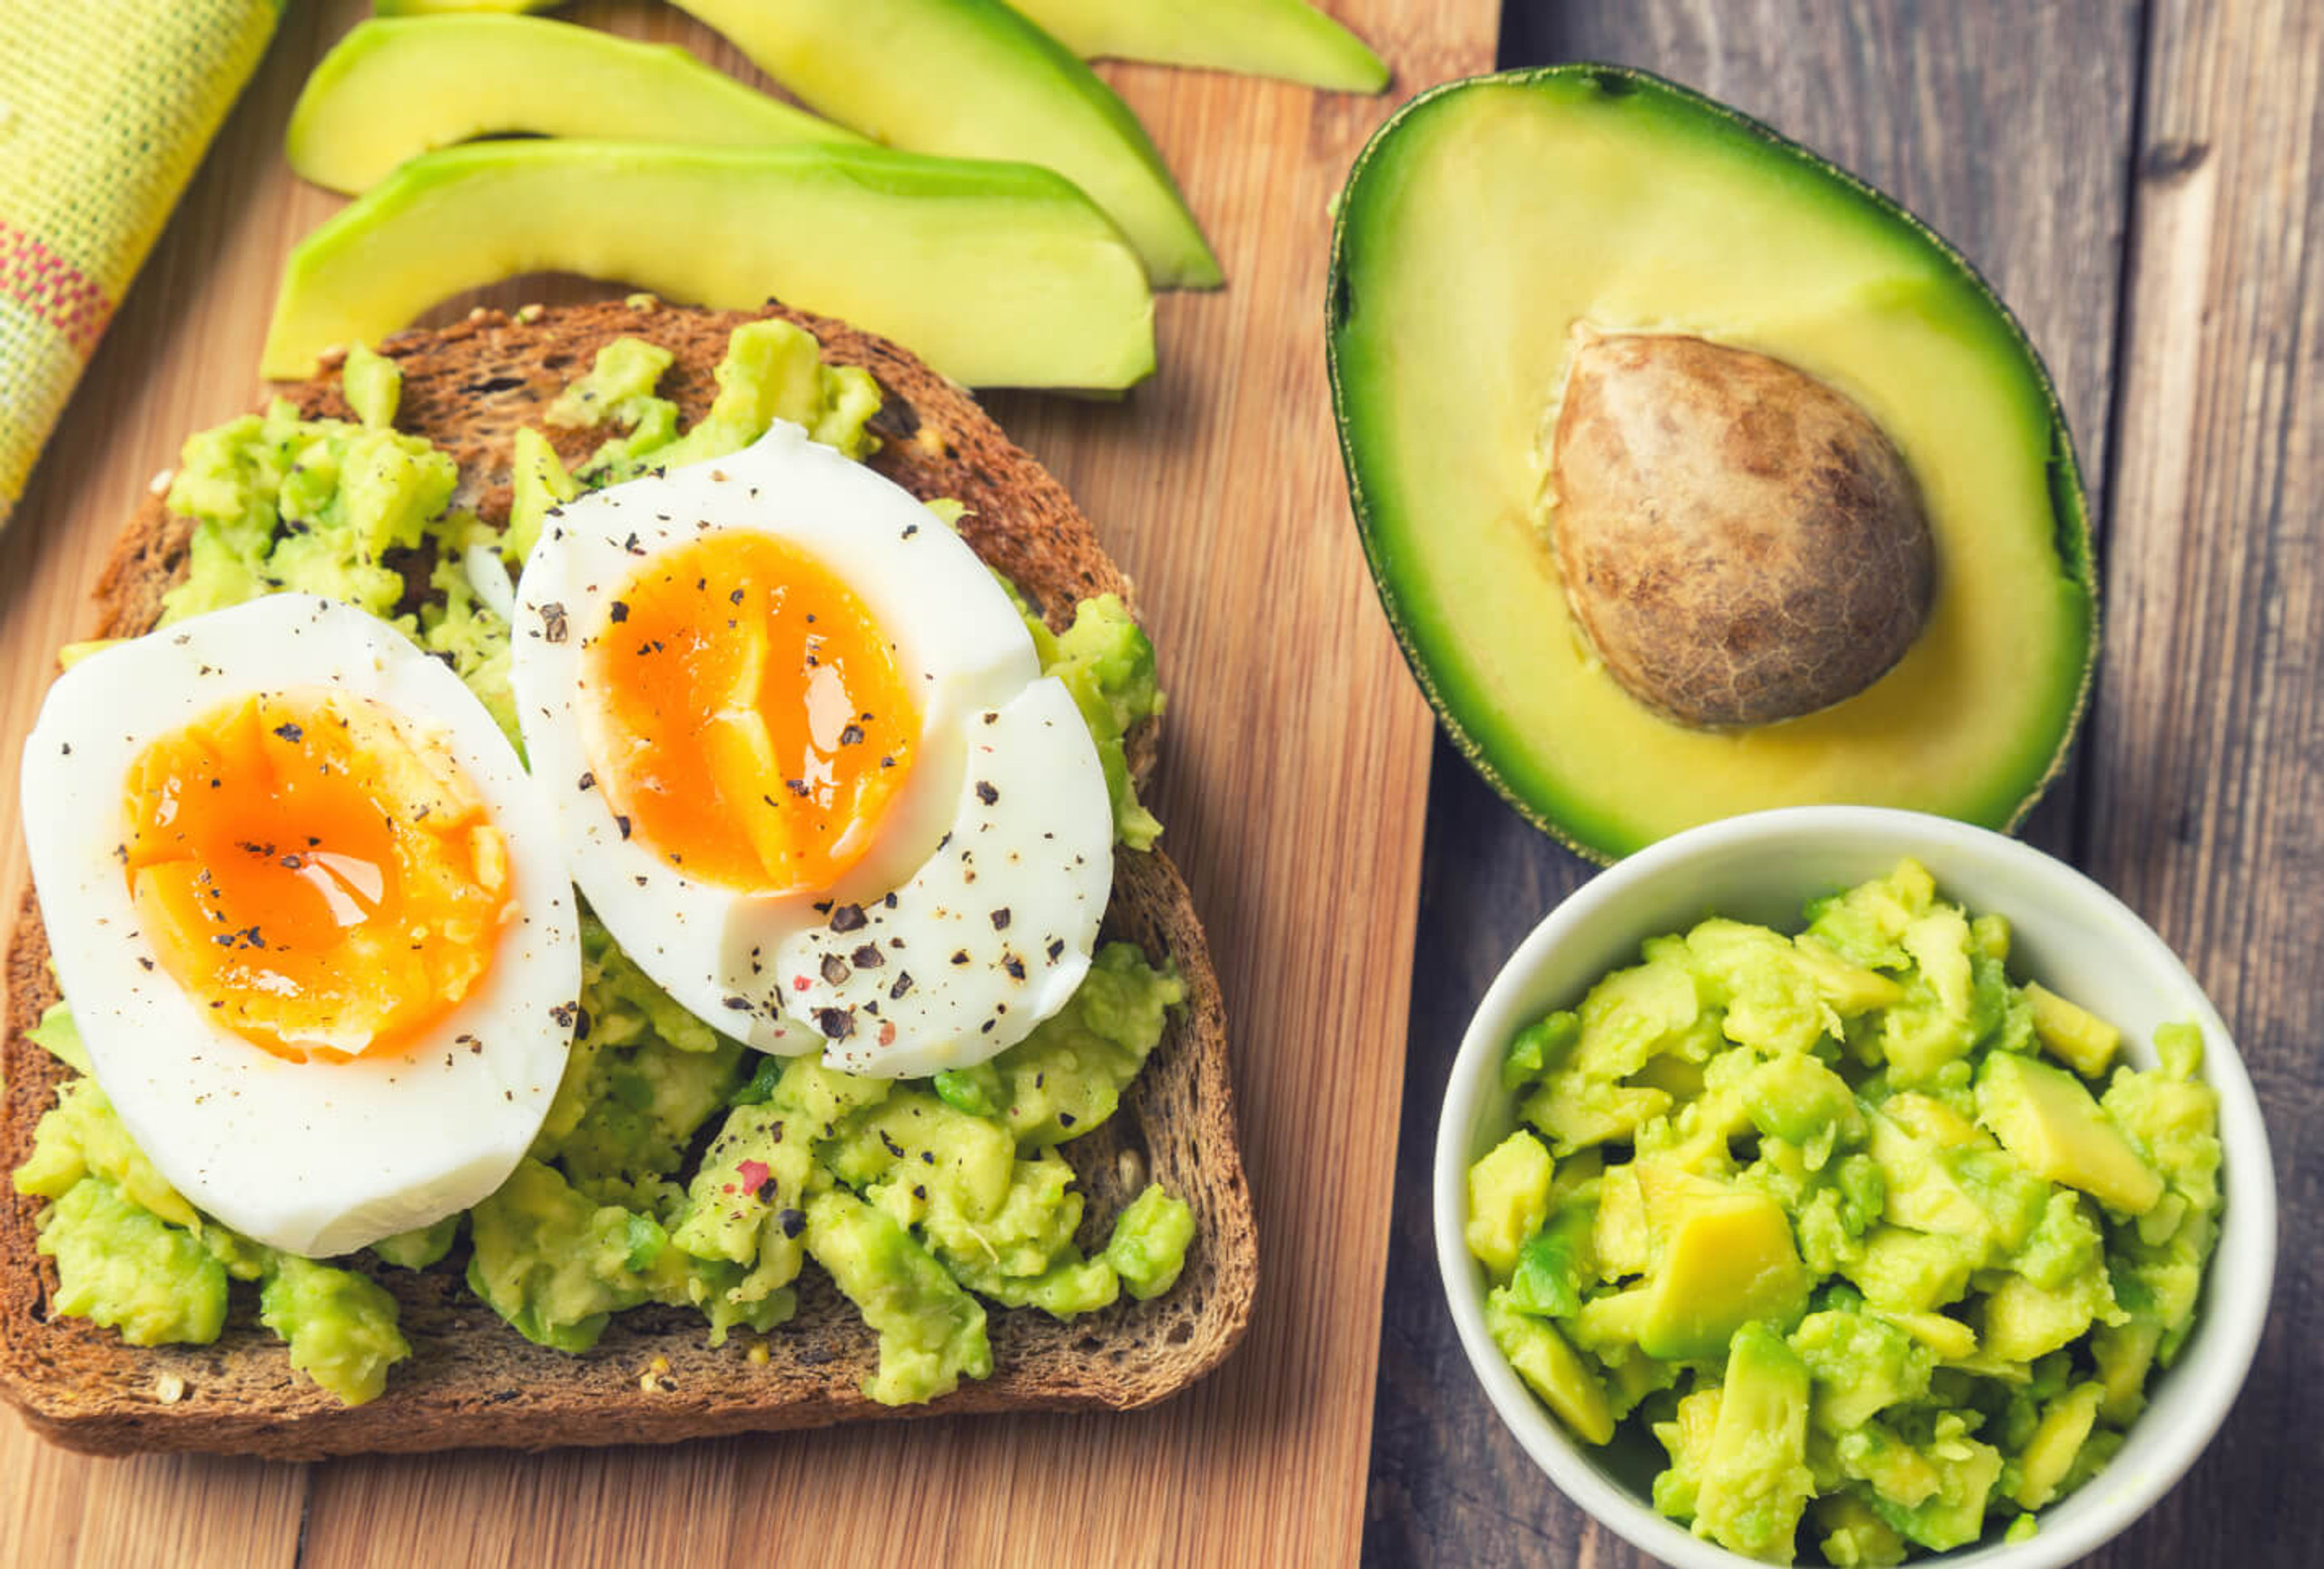 15 High-Fat Foods for Your Keto Diet